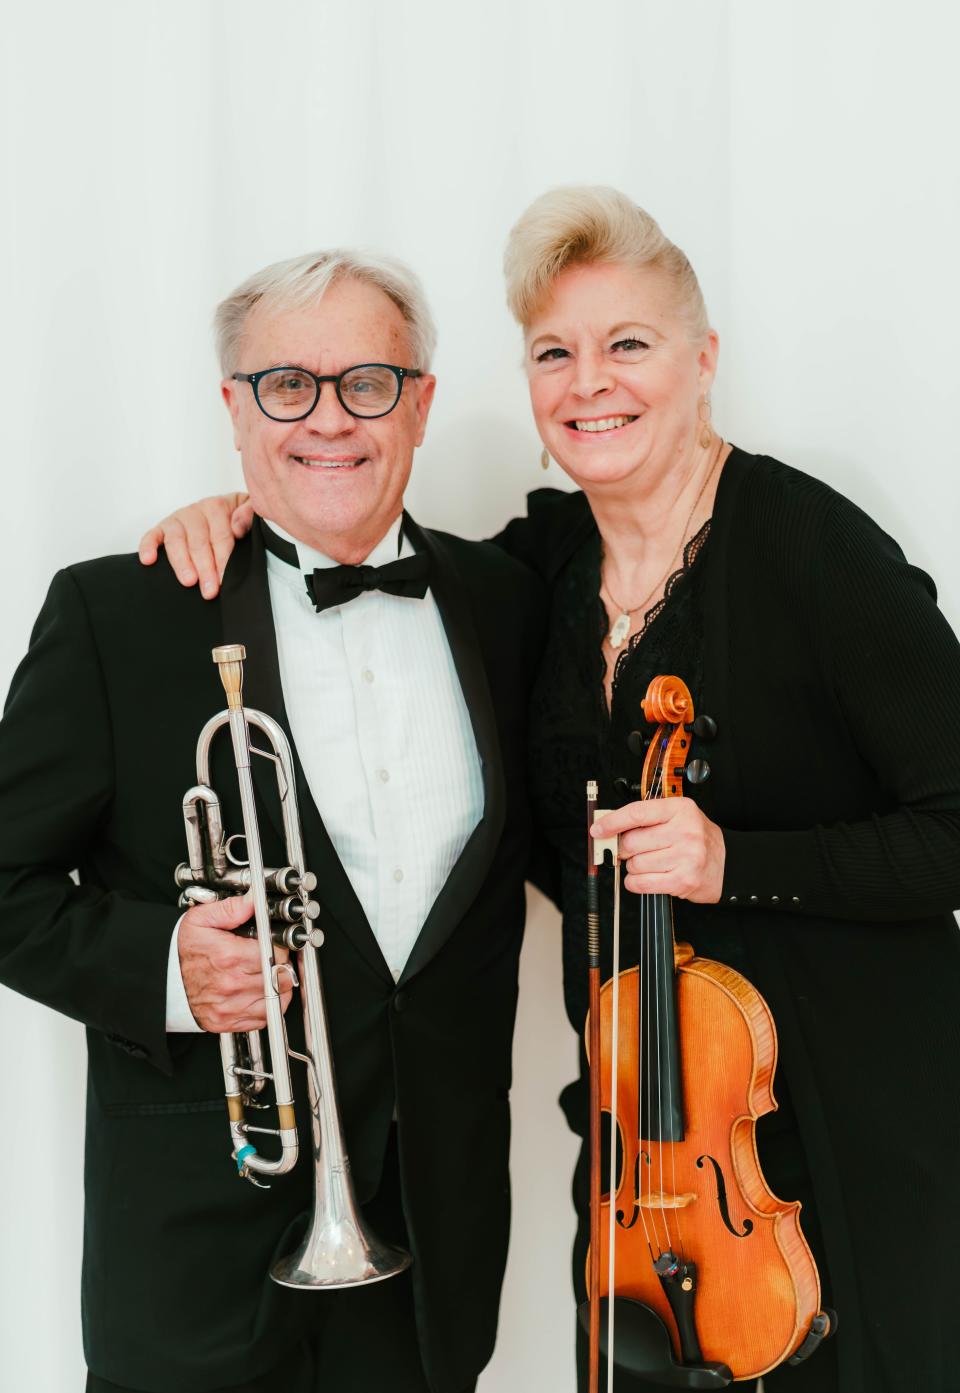 Brevard Symphony Orchestra's principal trumpeter Tom Macklin and assistant concertmaster Joni Hanze will be featured at the "Our Favorite Things" concert on June 17.